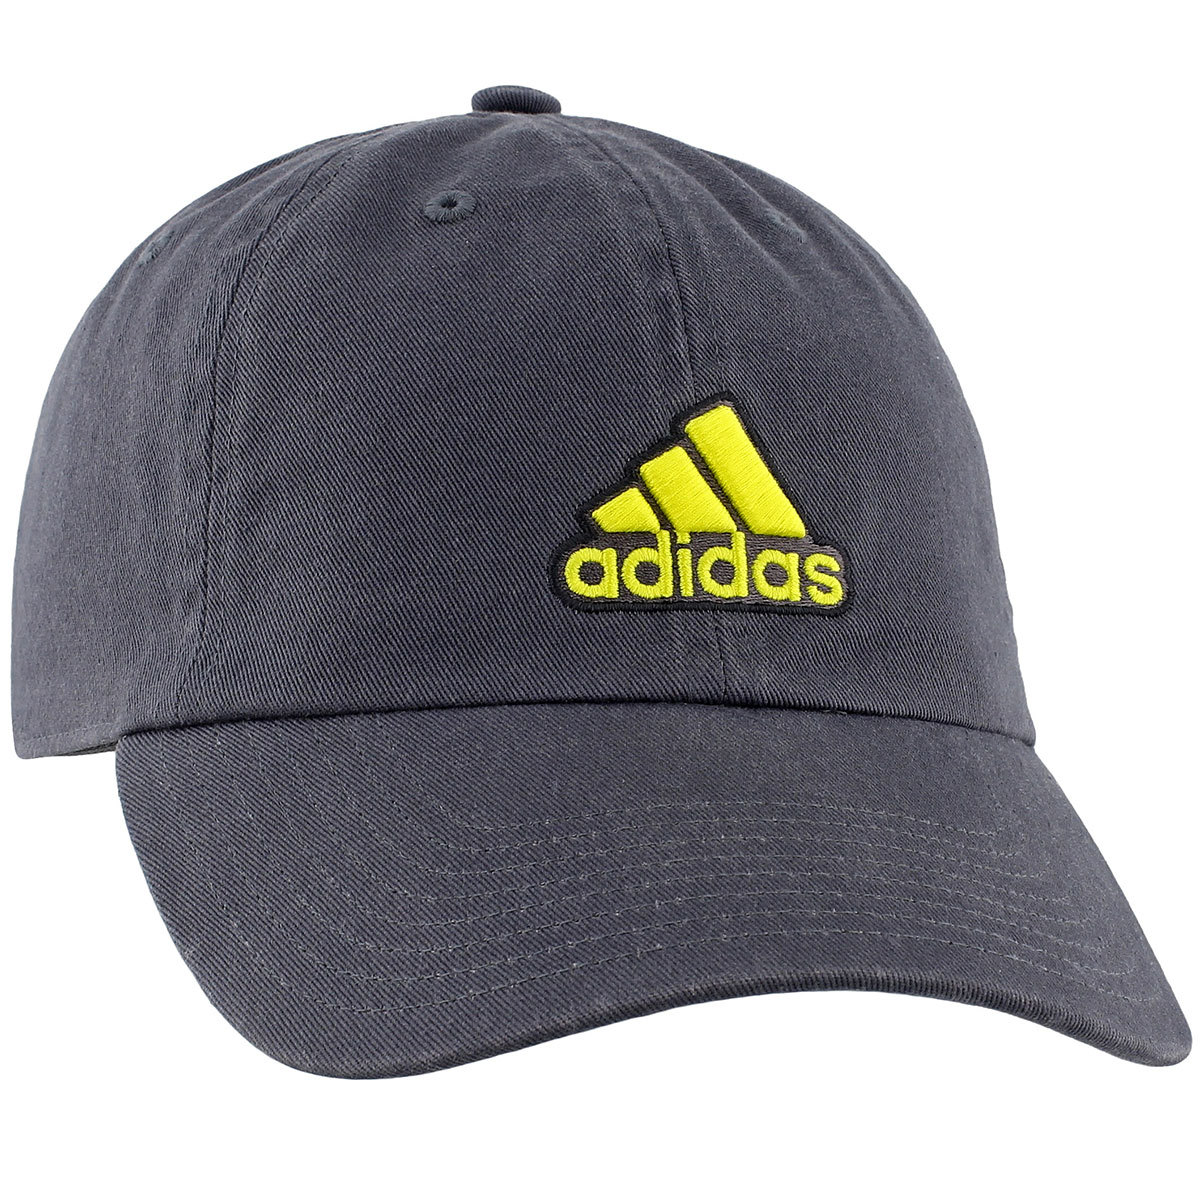 Adidas Men's Ultimate Relaxed Cap